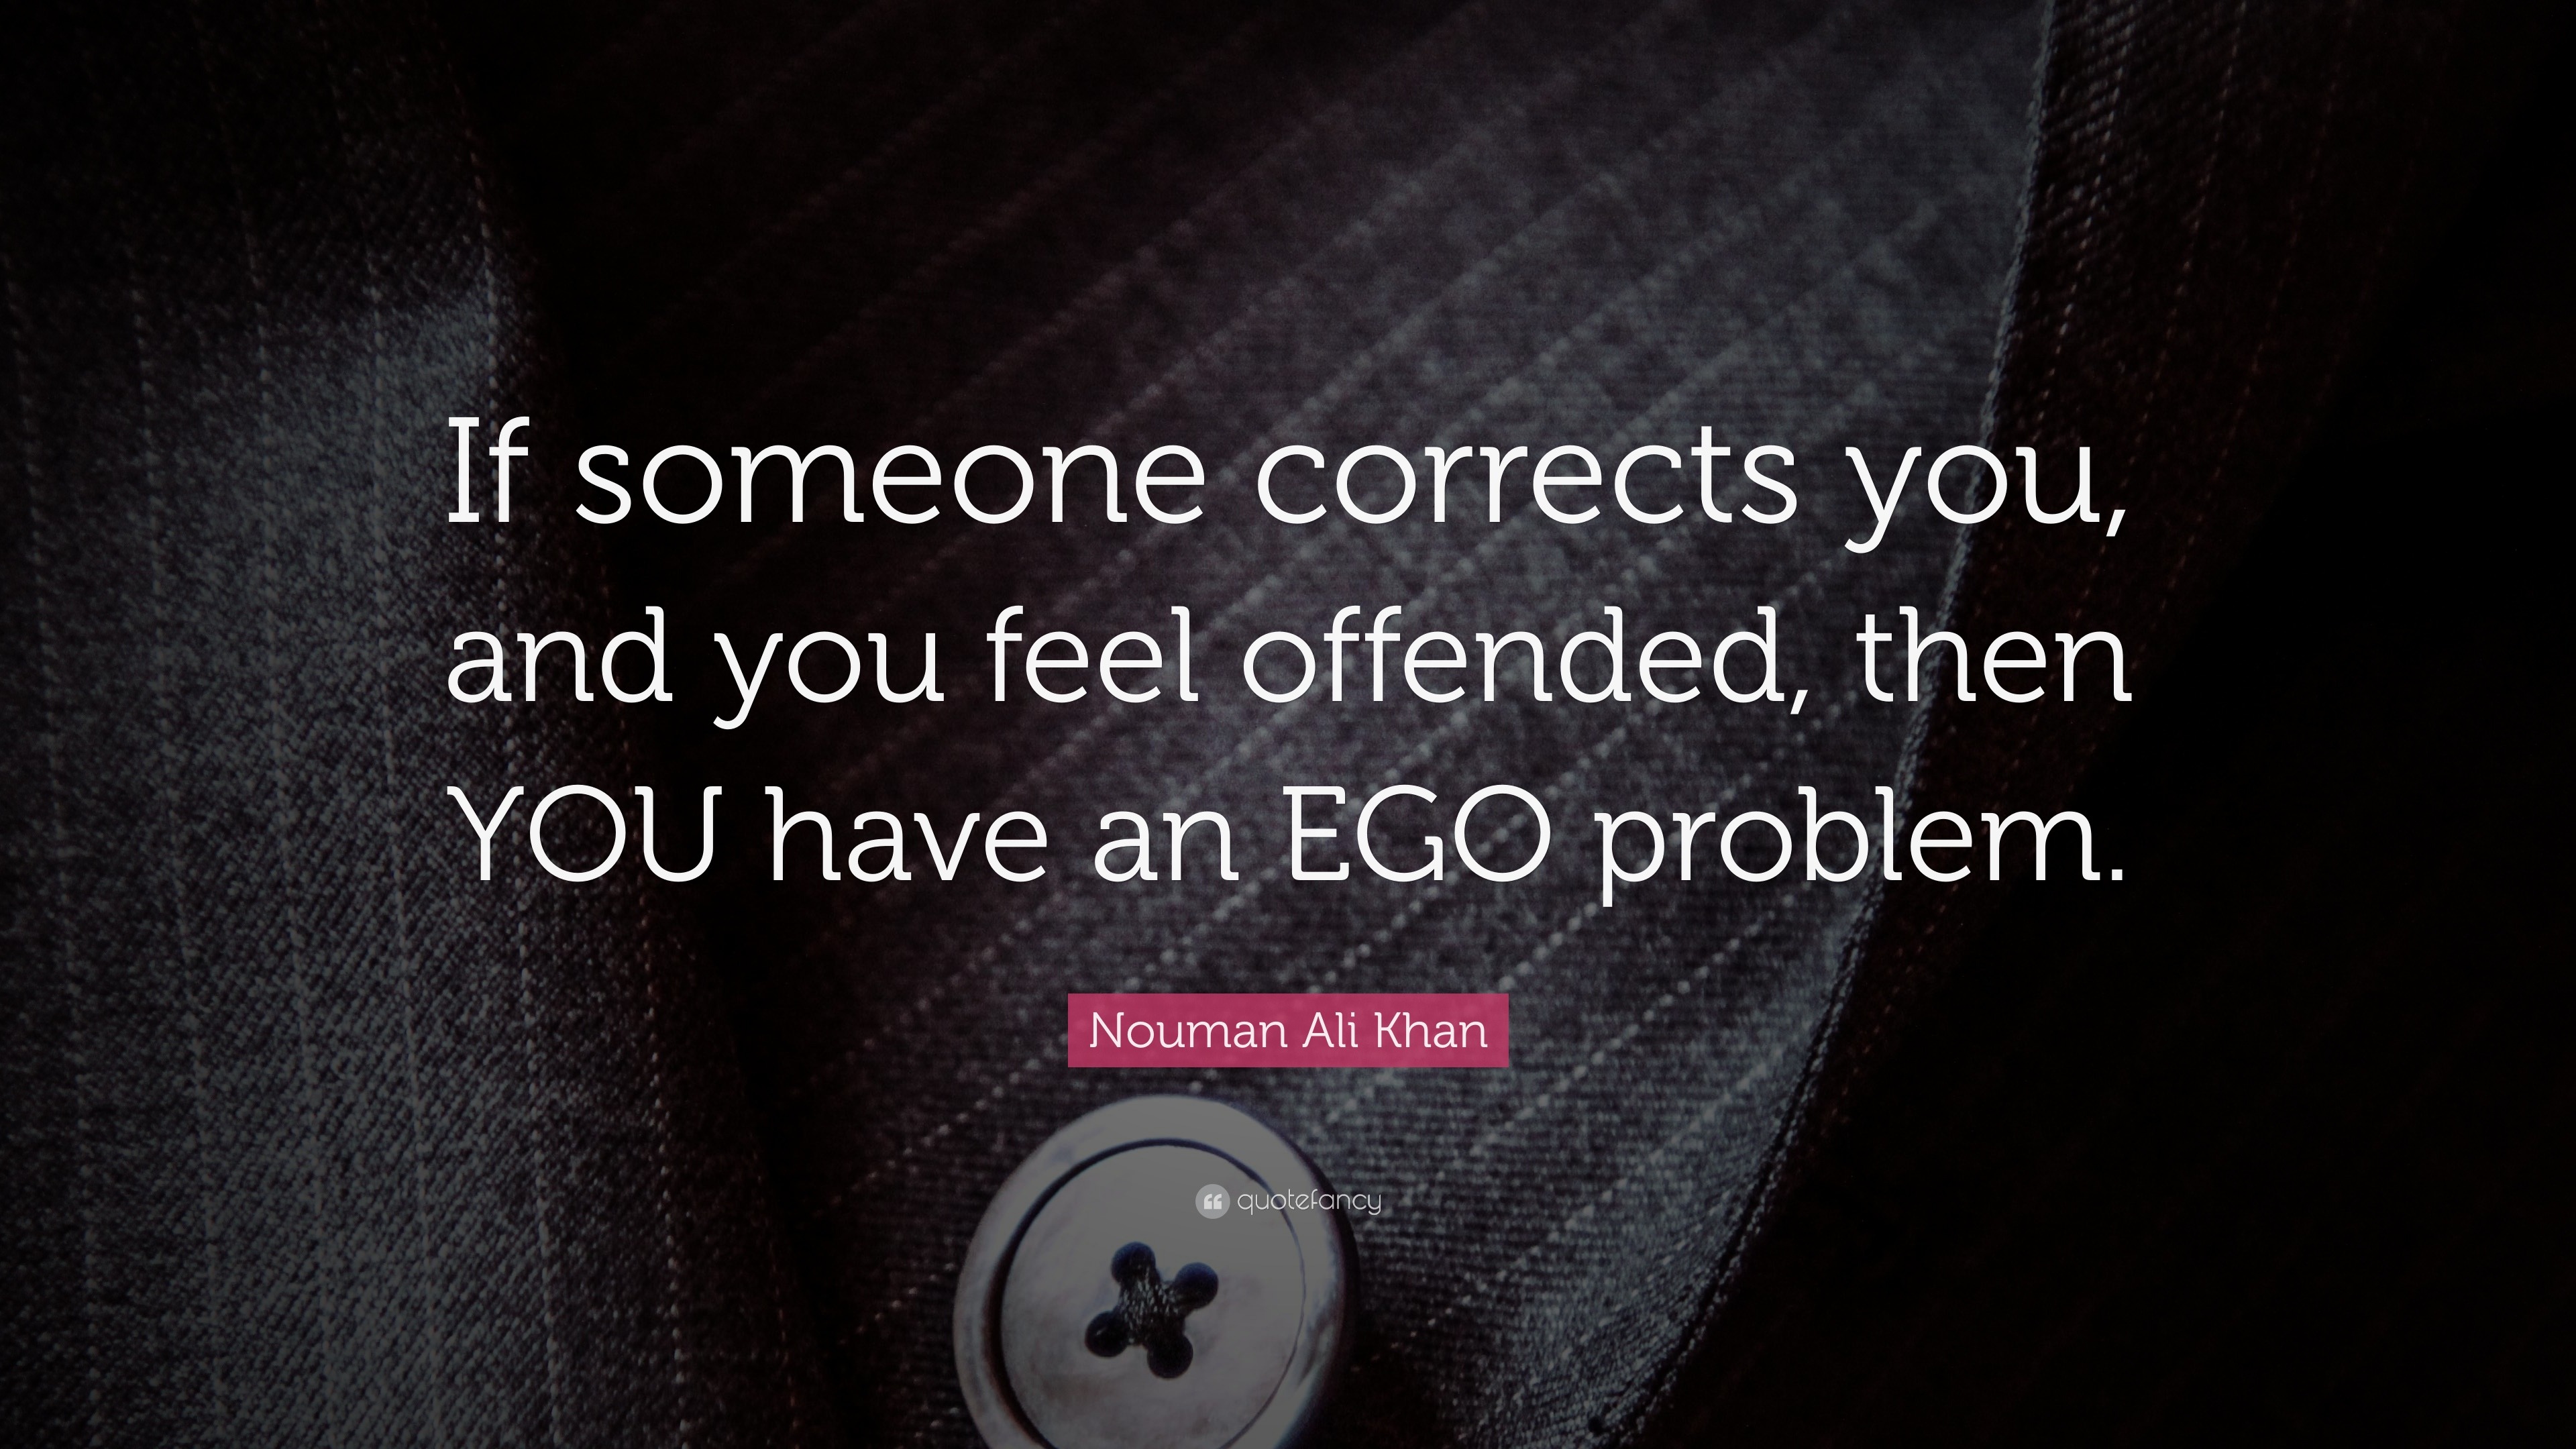 Ego Quotes “If someone corrects you and you feel offended then YOU